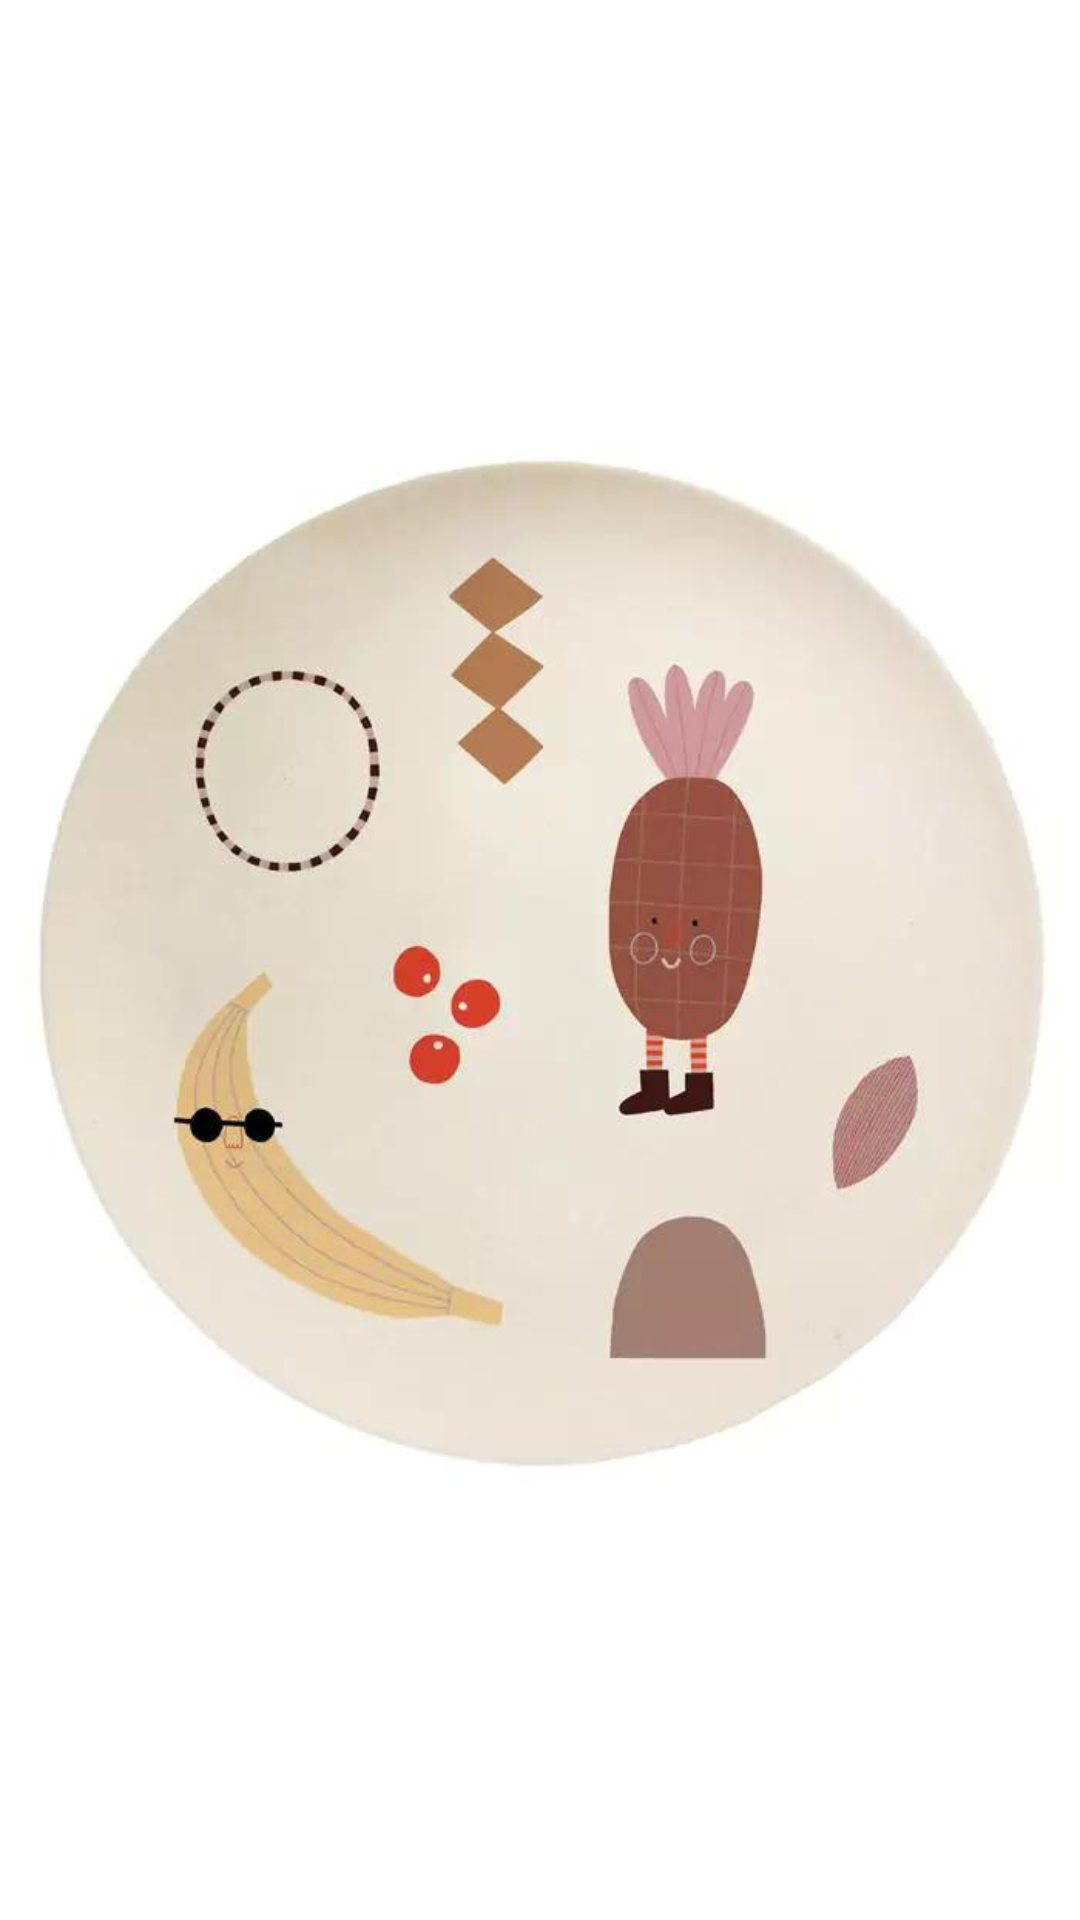 Plate of cheeky fruits